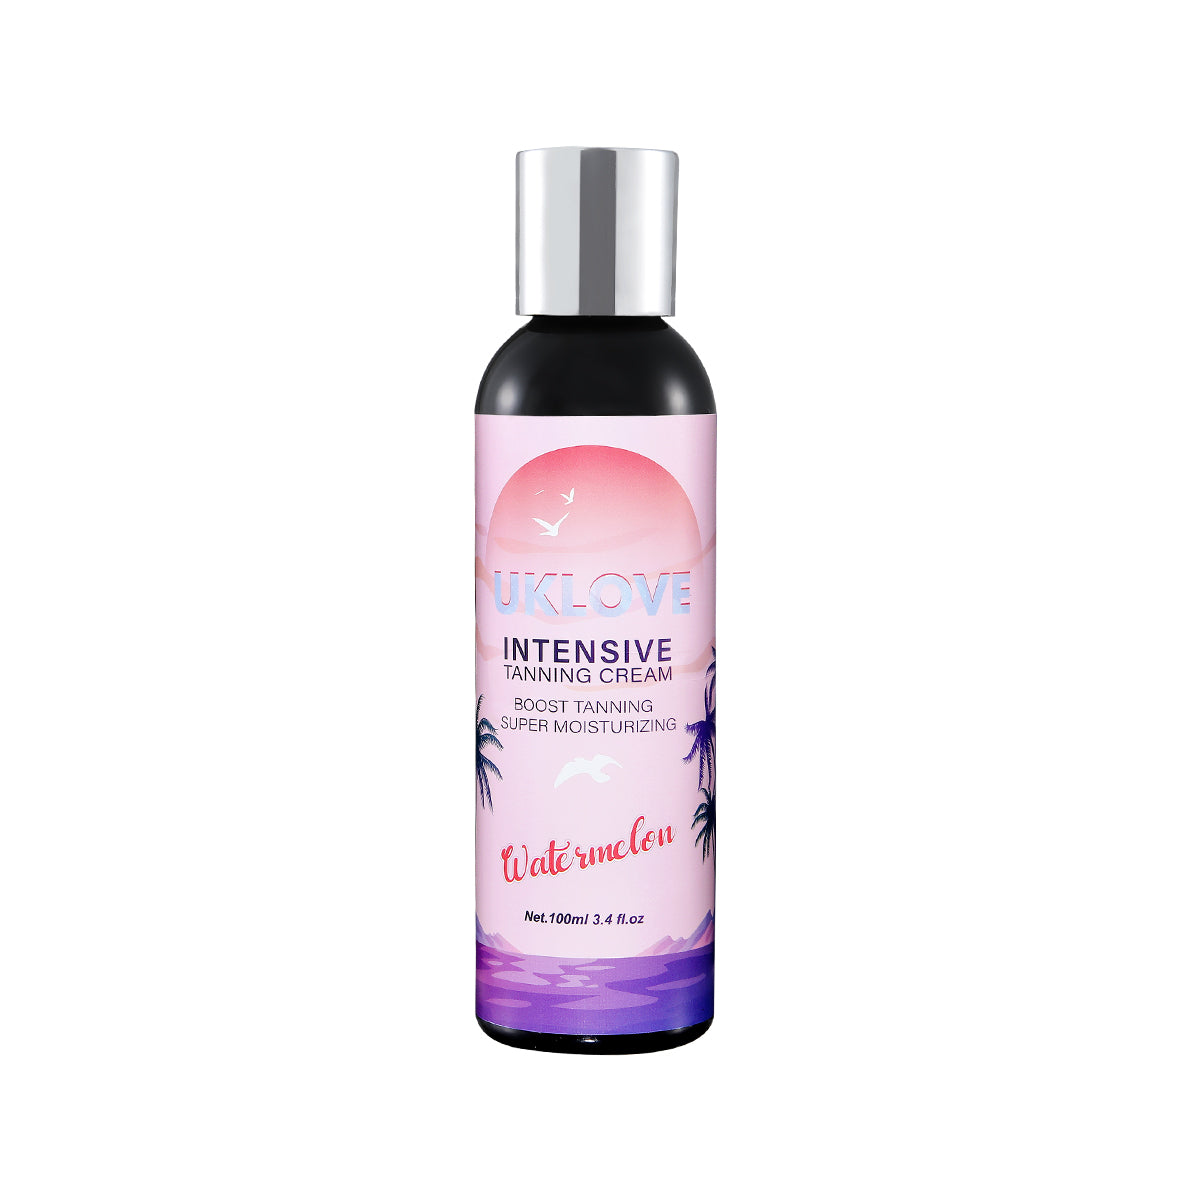 Cream Elegance: A bottle of suntan lotion specifically designed for use in tanning beds